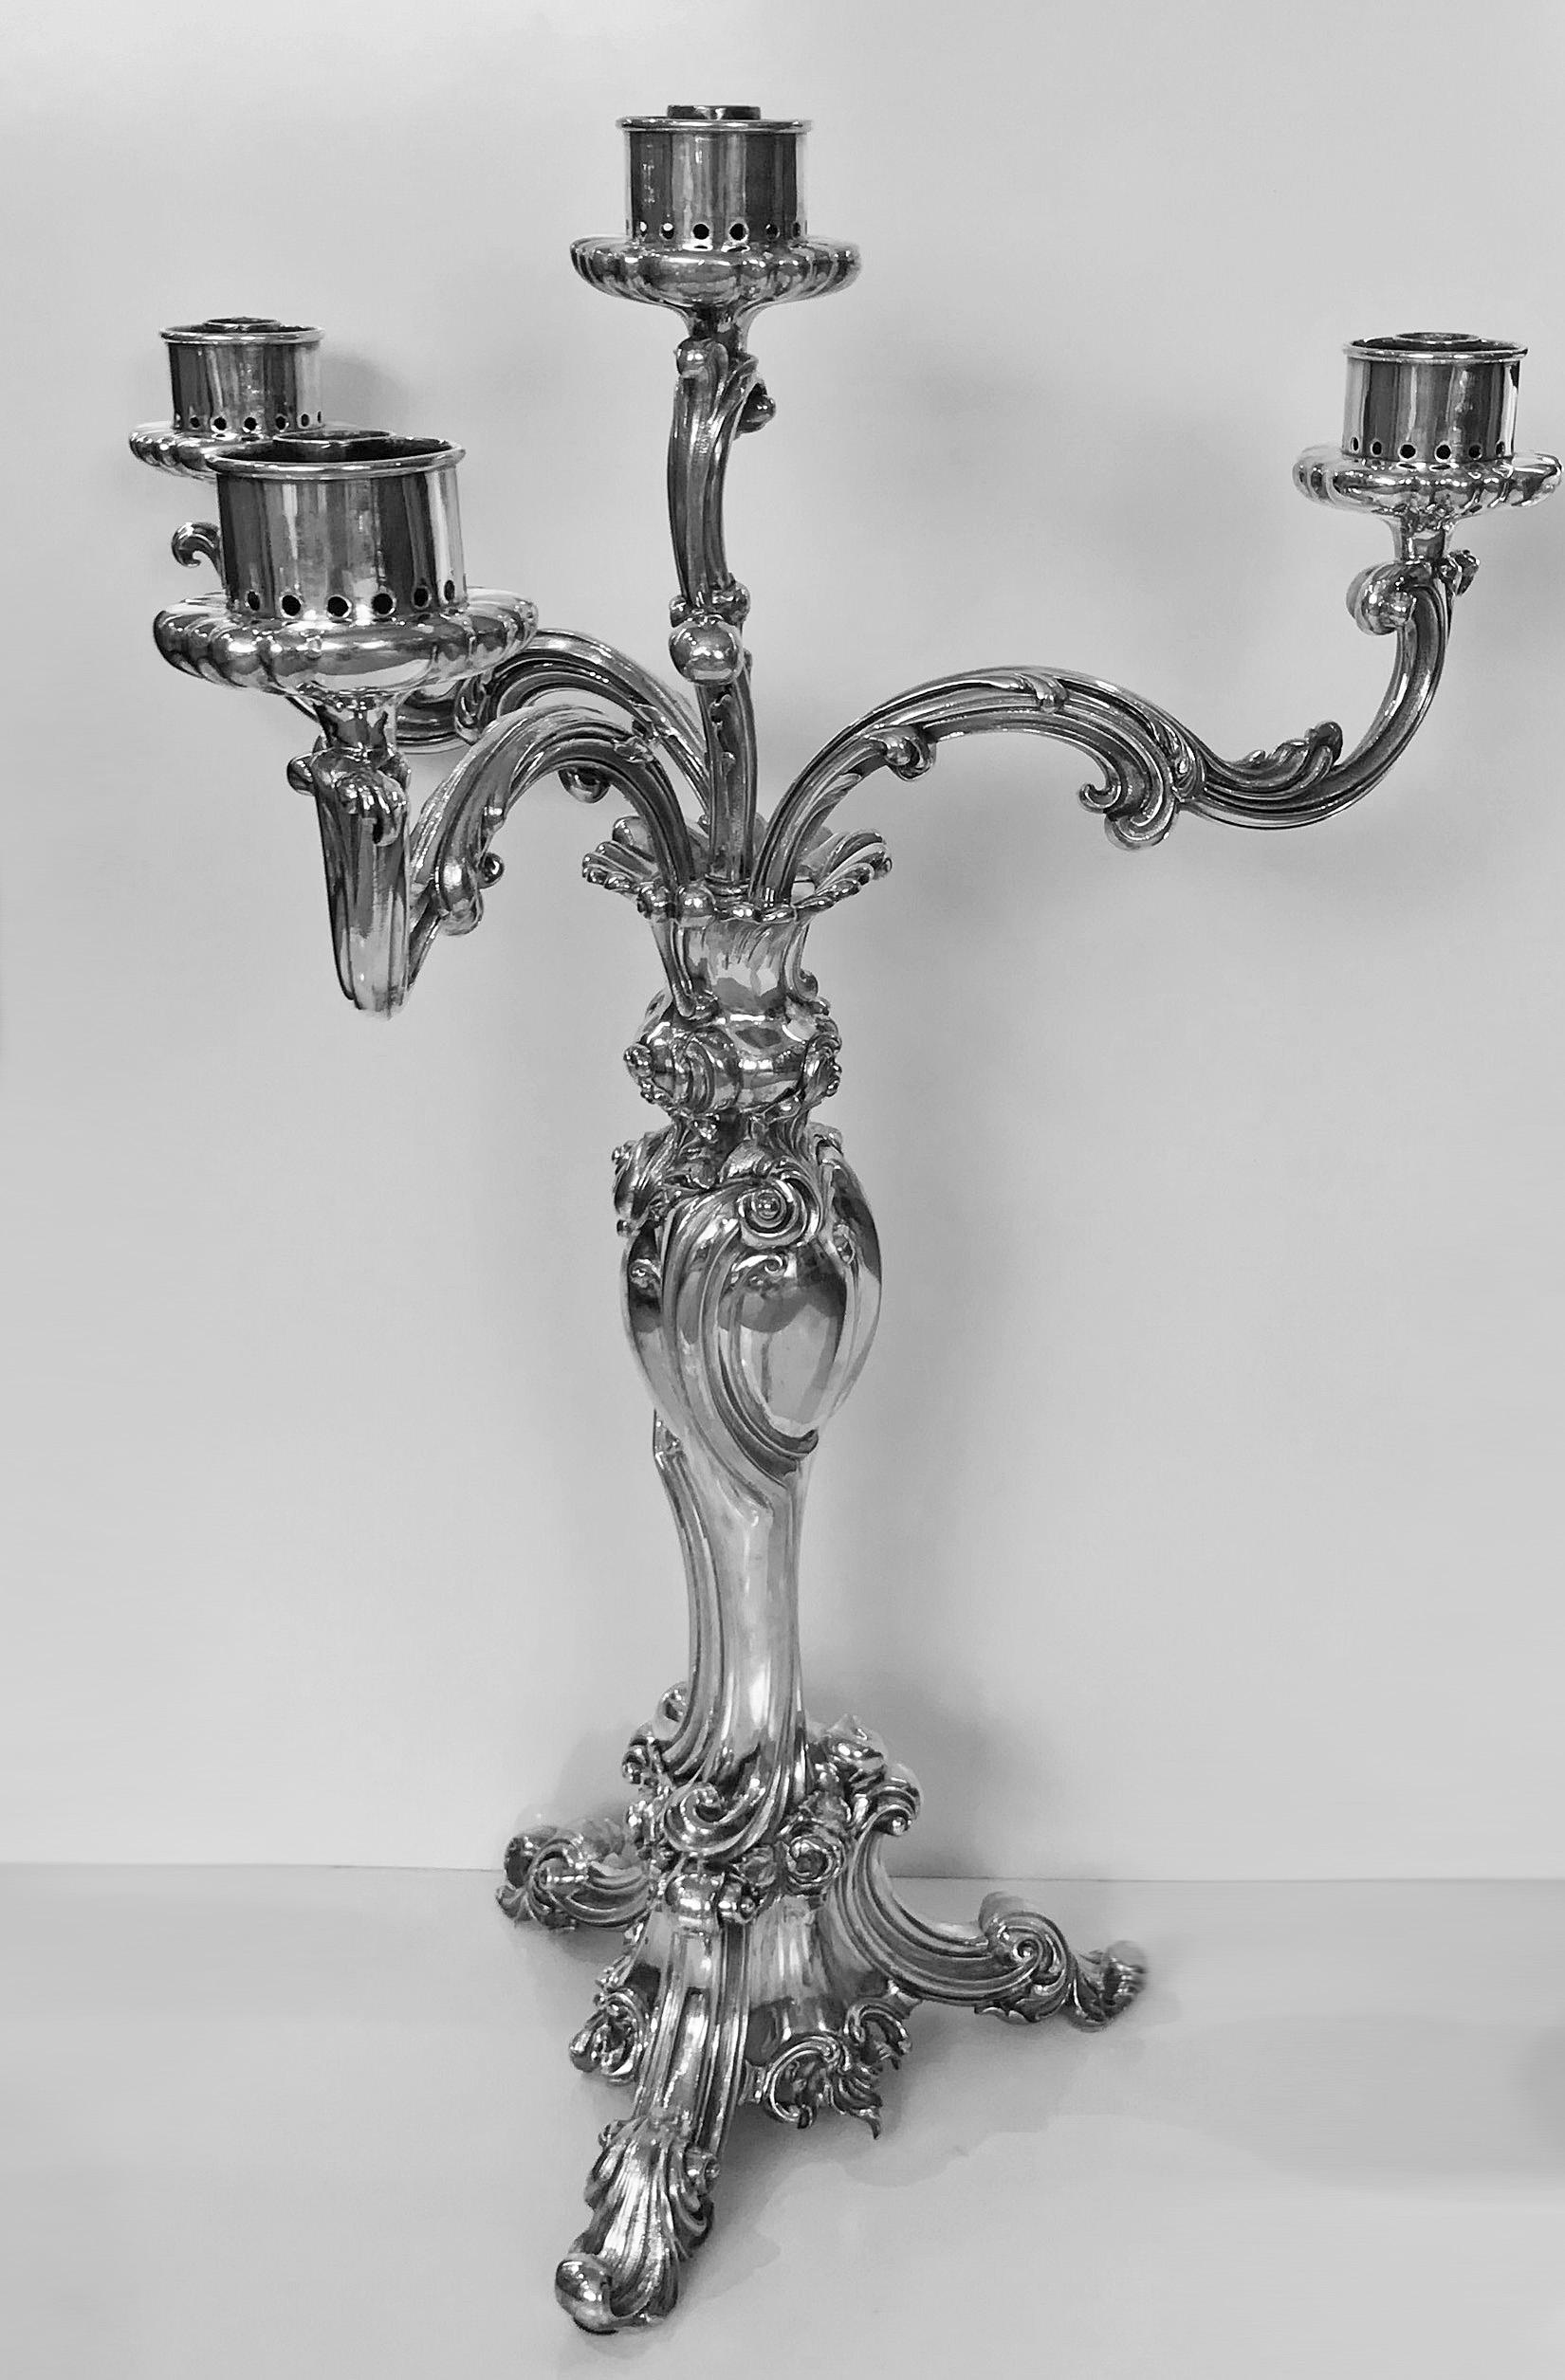 Rare early large Elkington Storm light centrepiece candelabra, England, 1844. The centrepiece baluster central stem supporting four detachable storm lamp fitting supports, all decorated in rococo style with scroll and foliage on a triangular